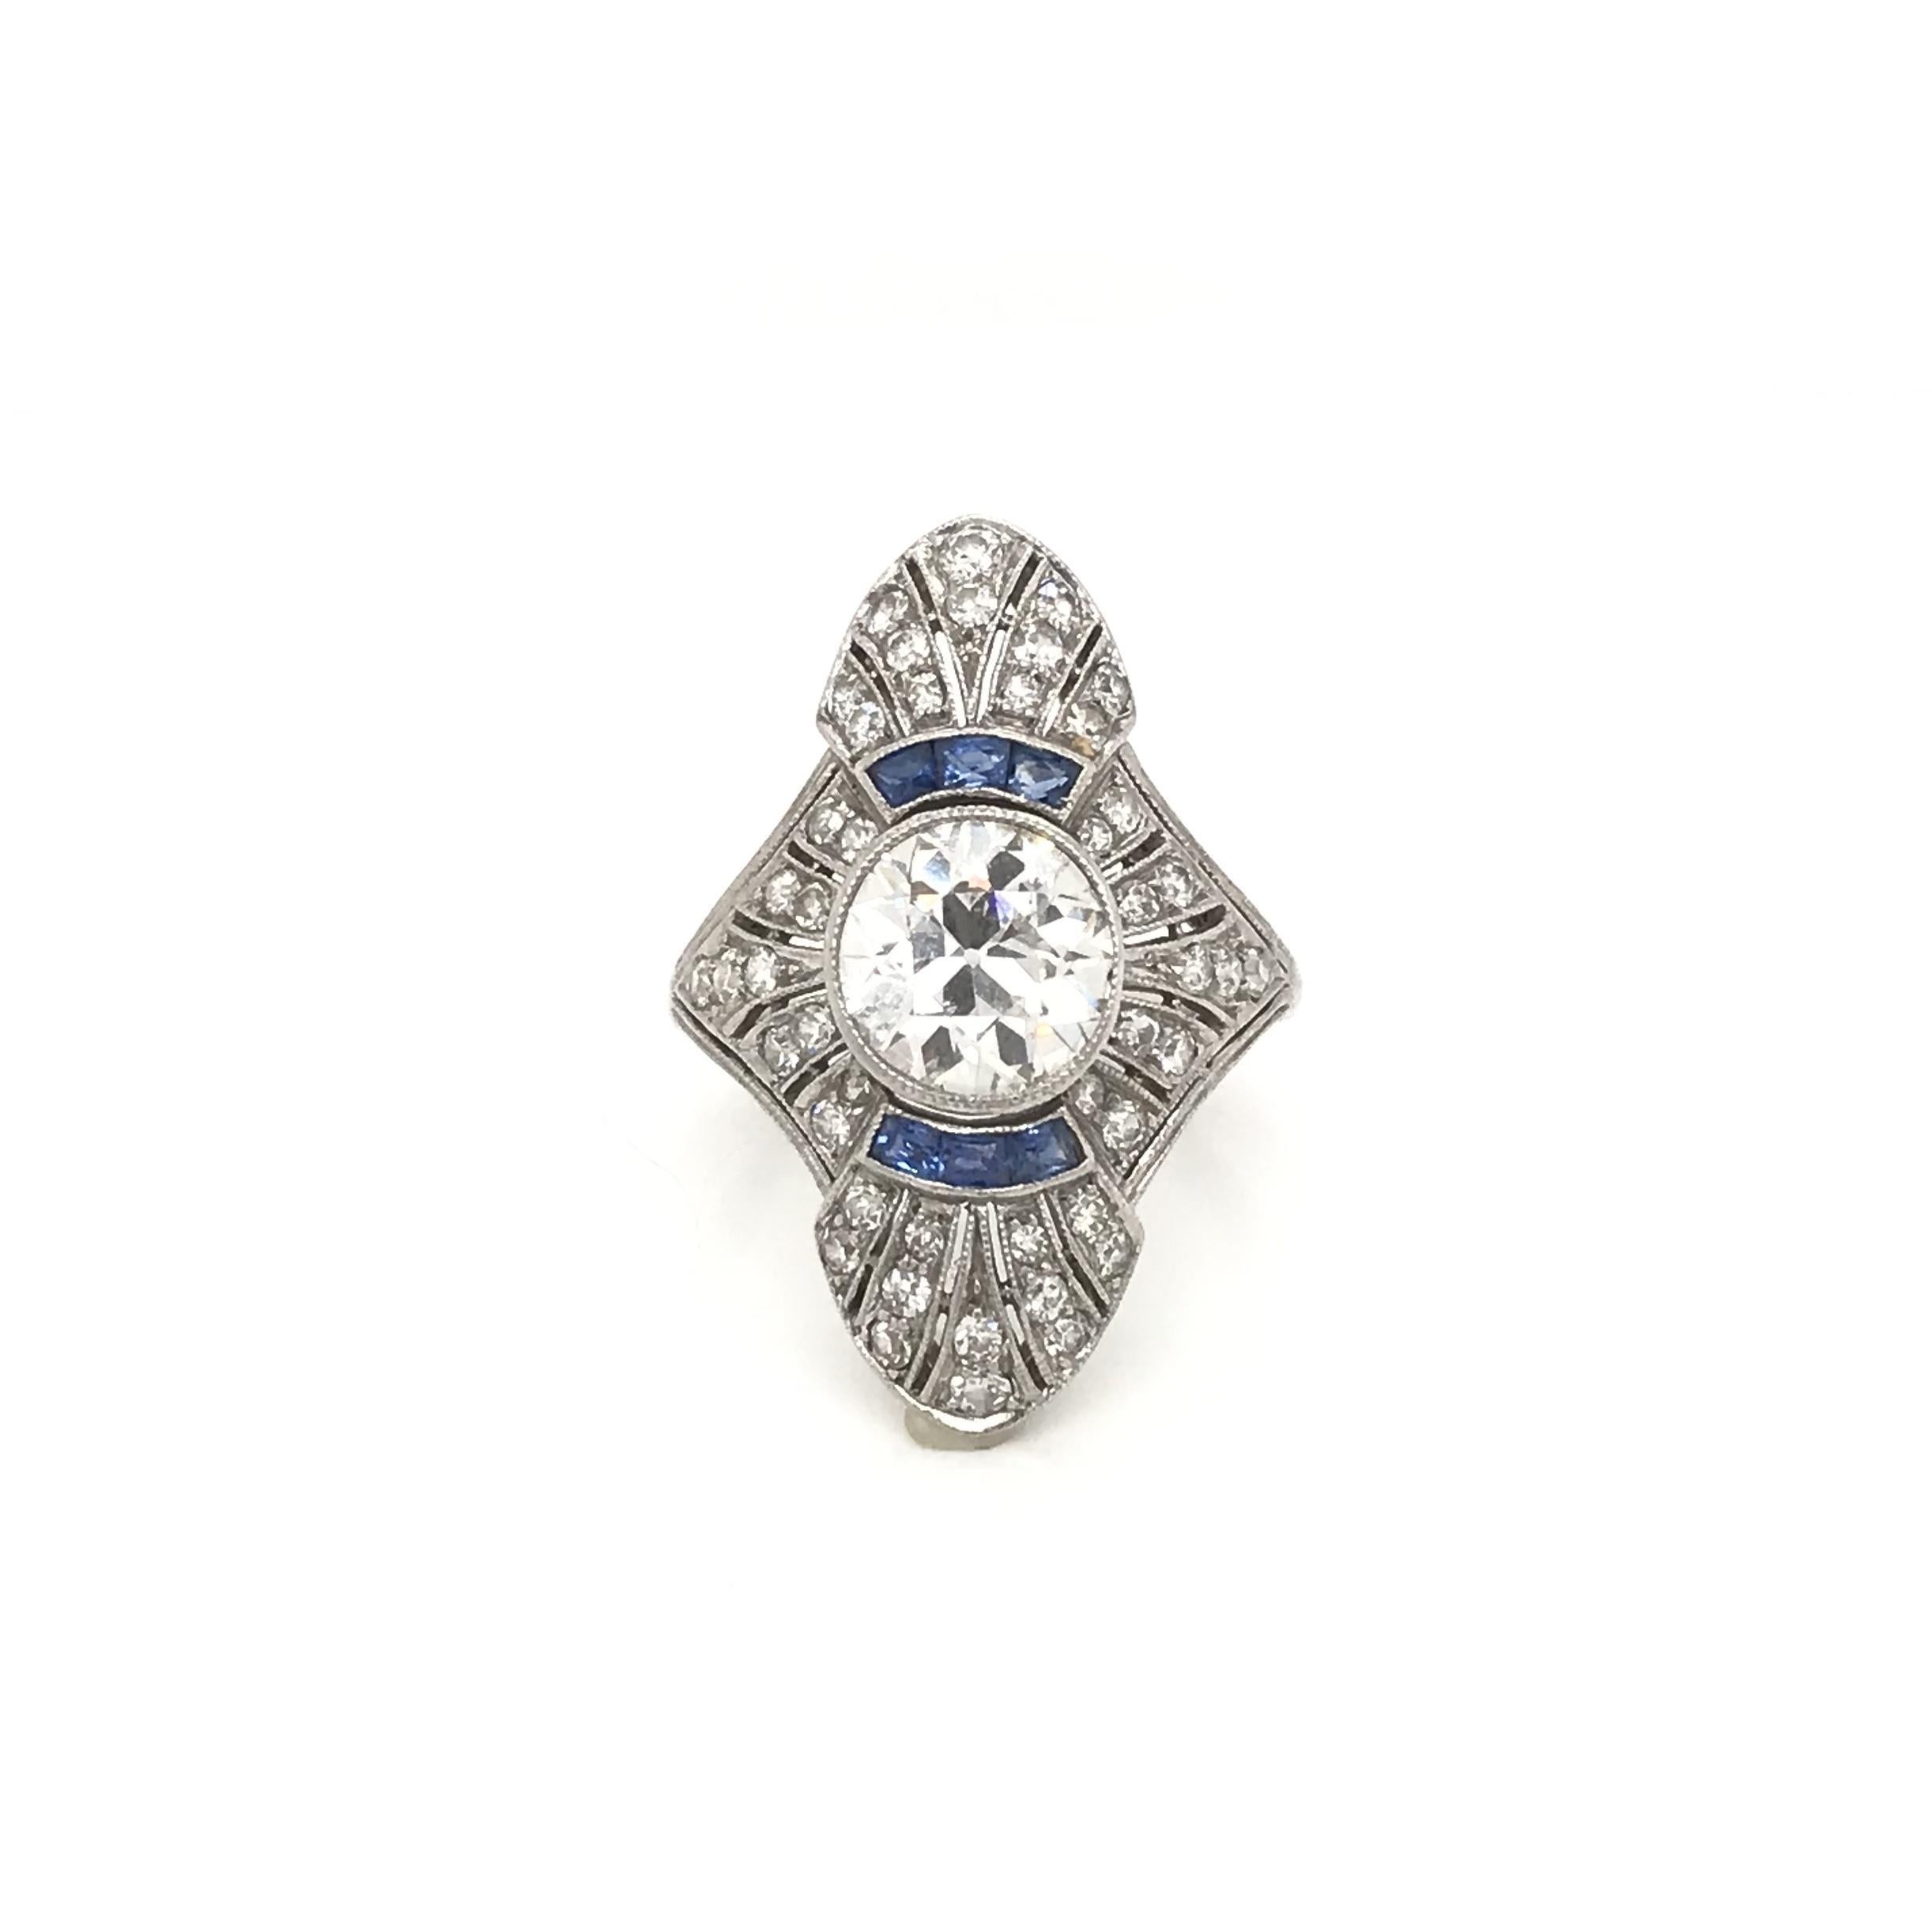 Old European Cut Antique Art Deco Diamond and French Cut Sapphire Dinner Ring